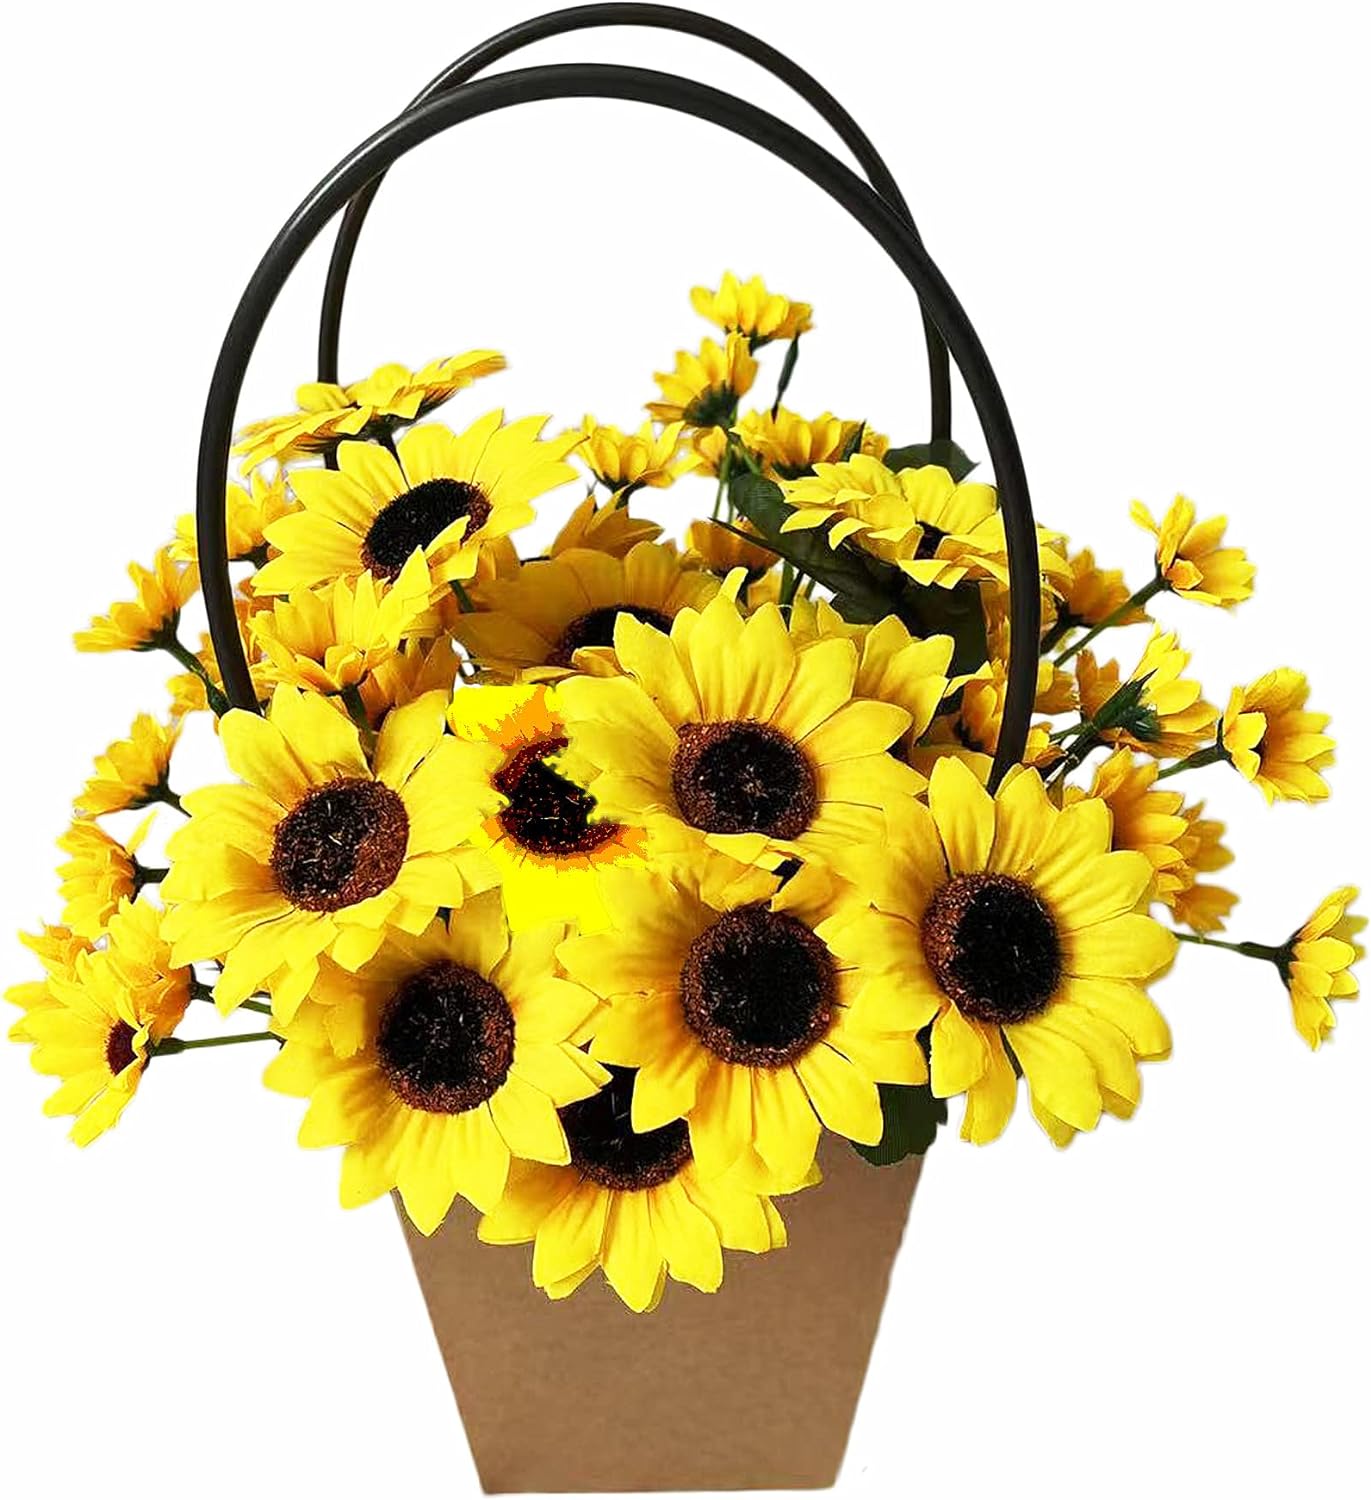 UKELER 4 Bunches Yellow Sunflowers Artificial Flowers Mini Fake Sunflowers Bouquet with Stems for Home Decoration Indoor Outdoor Party DIY Wedding Bouquets Baby Shower